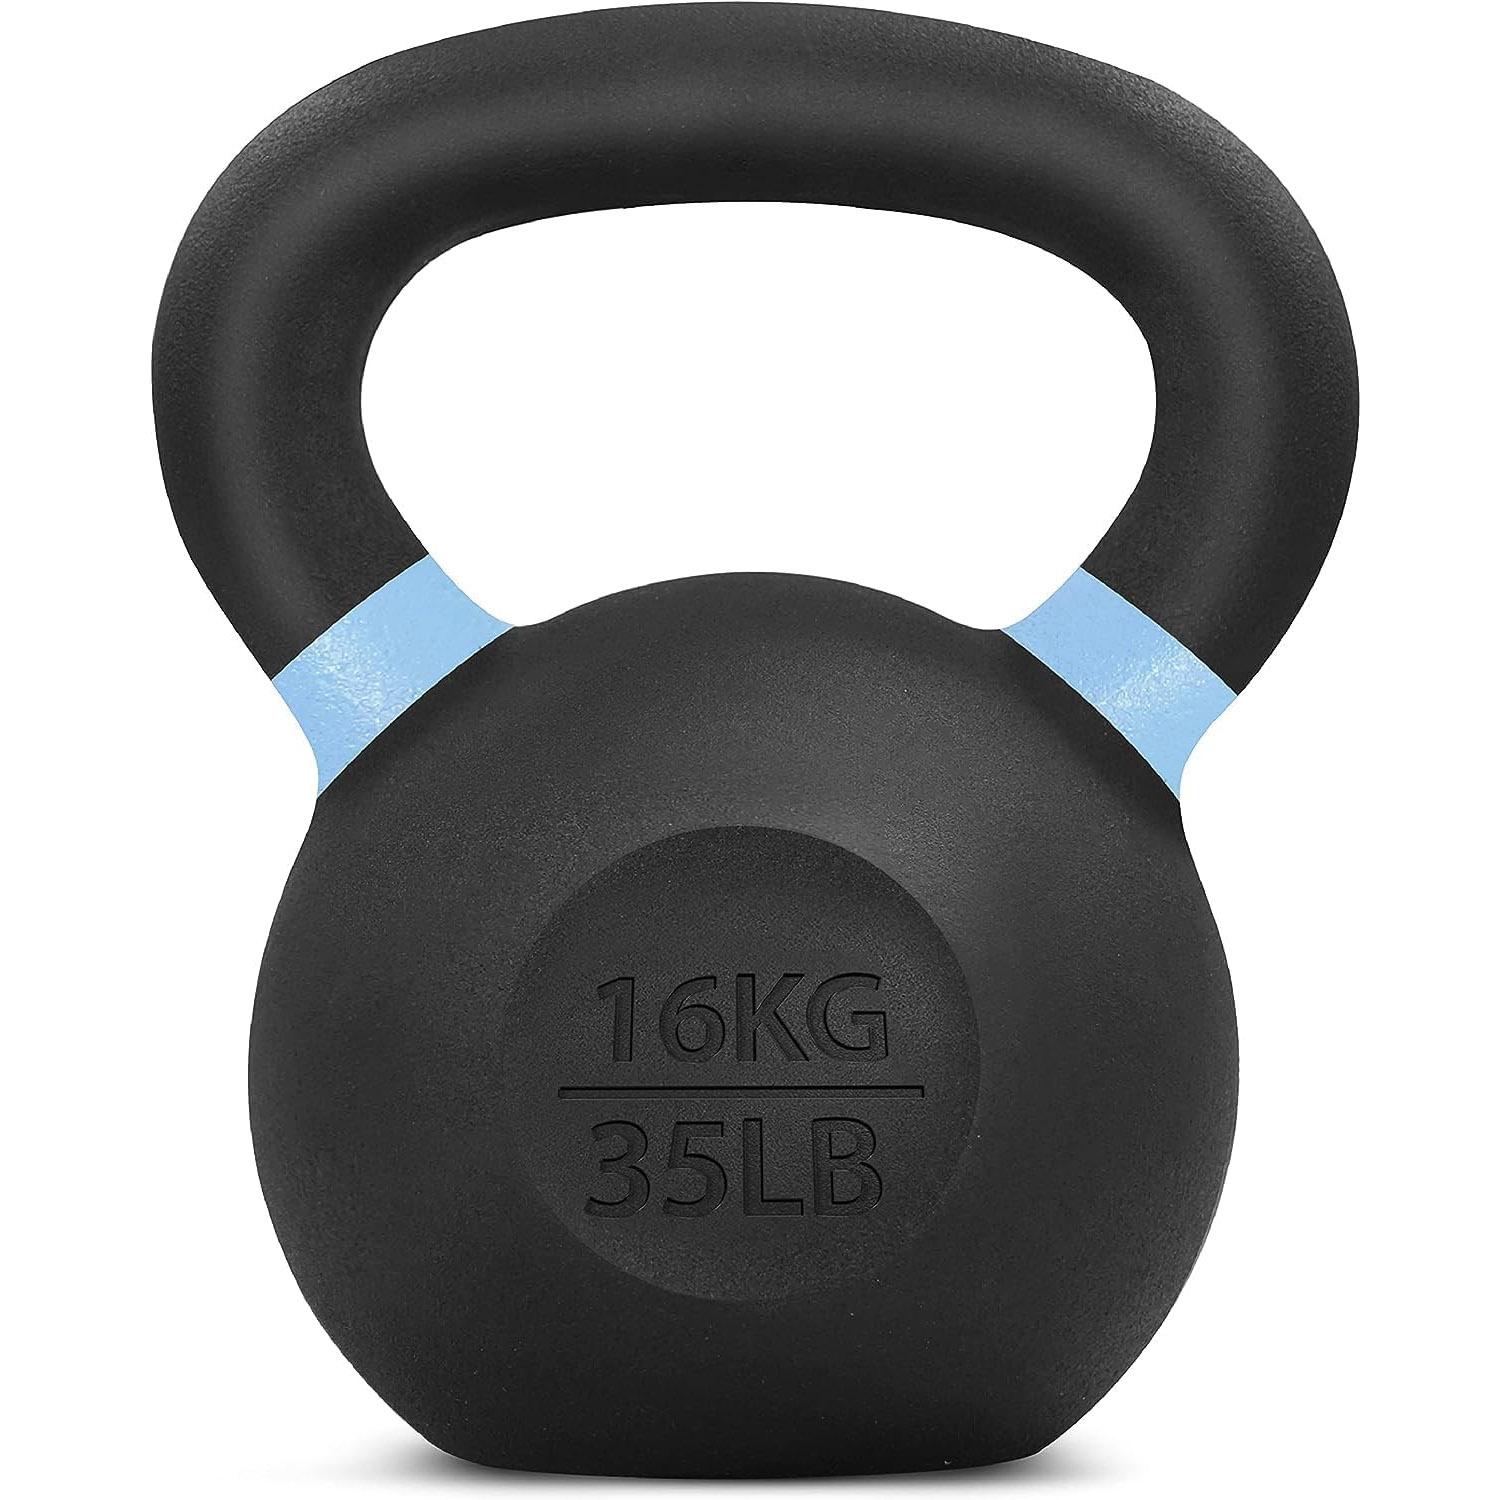 Yes4All Cast Iron 35lbs Kettlebell Weight for $25.09